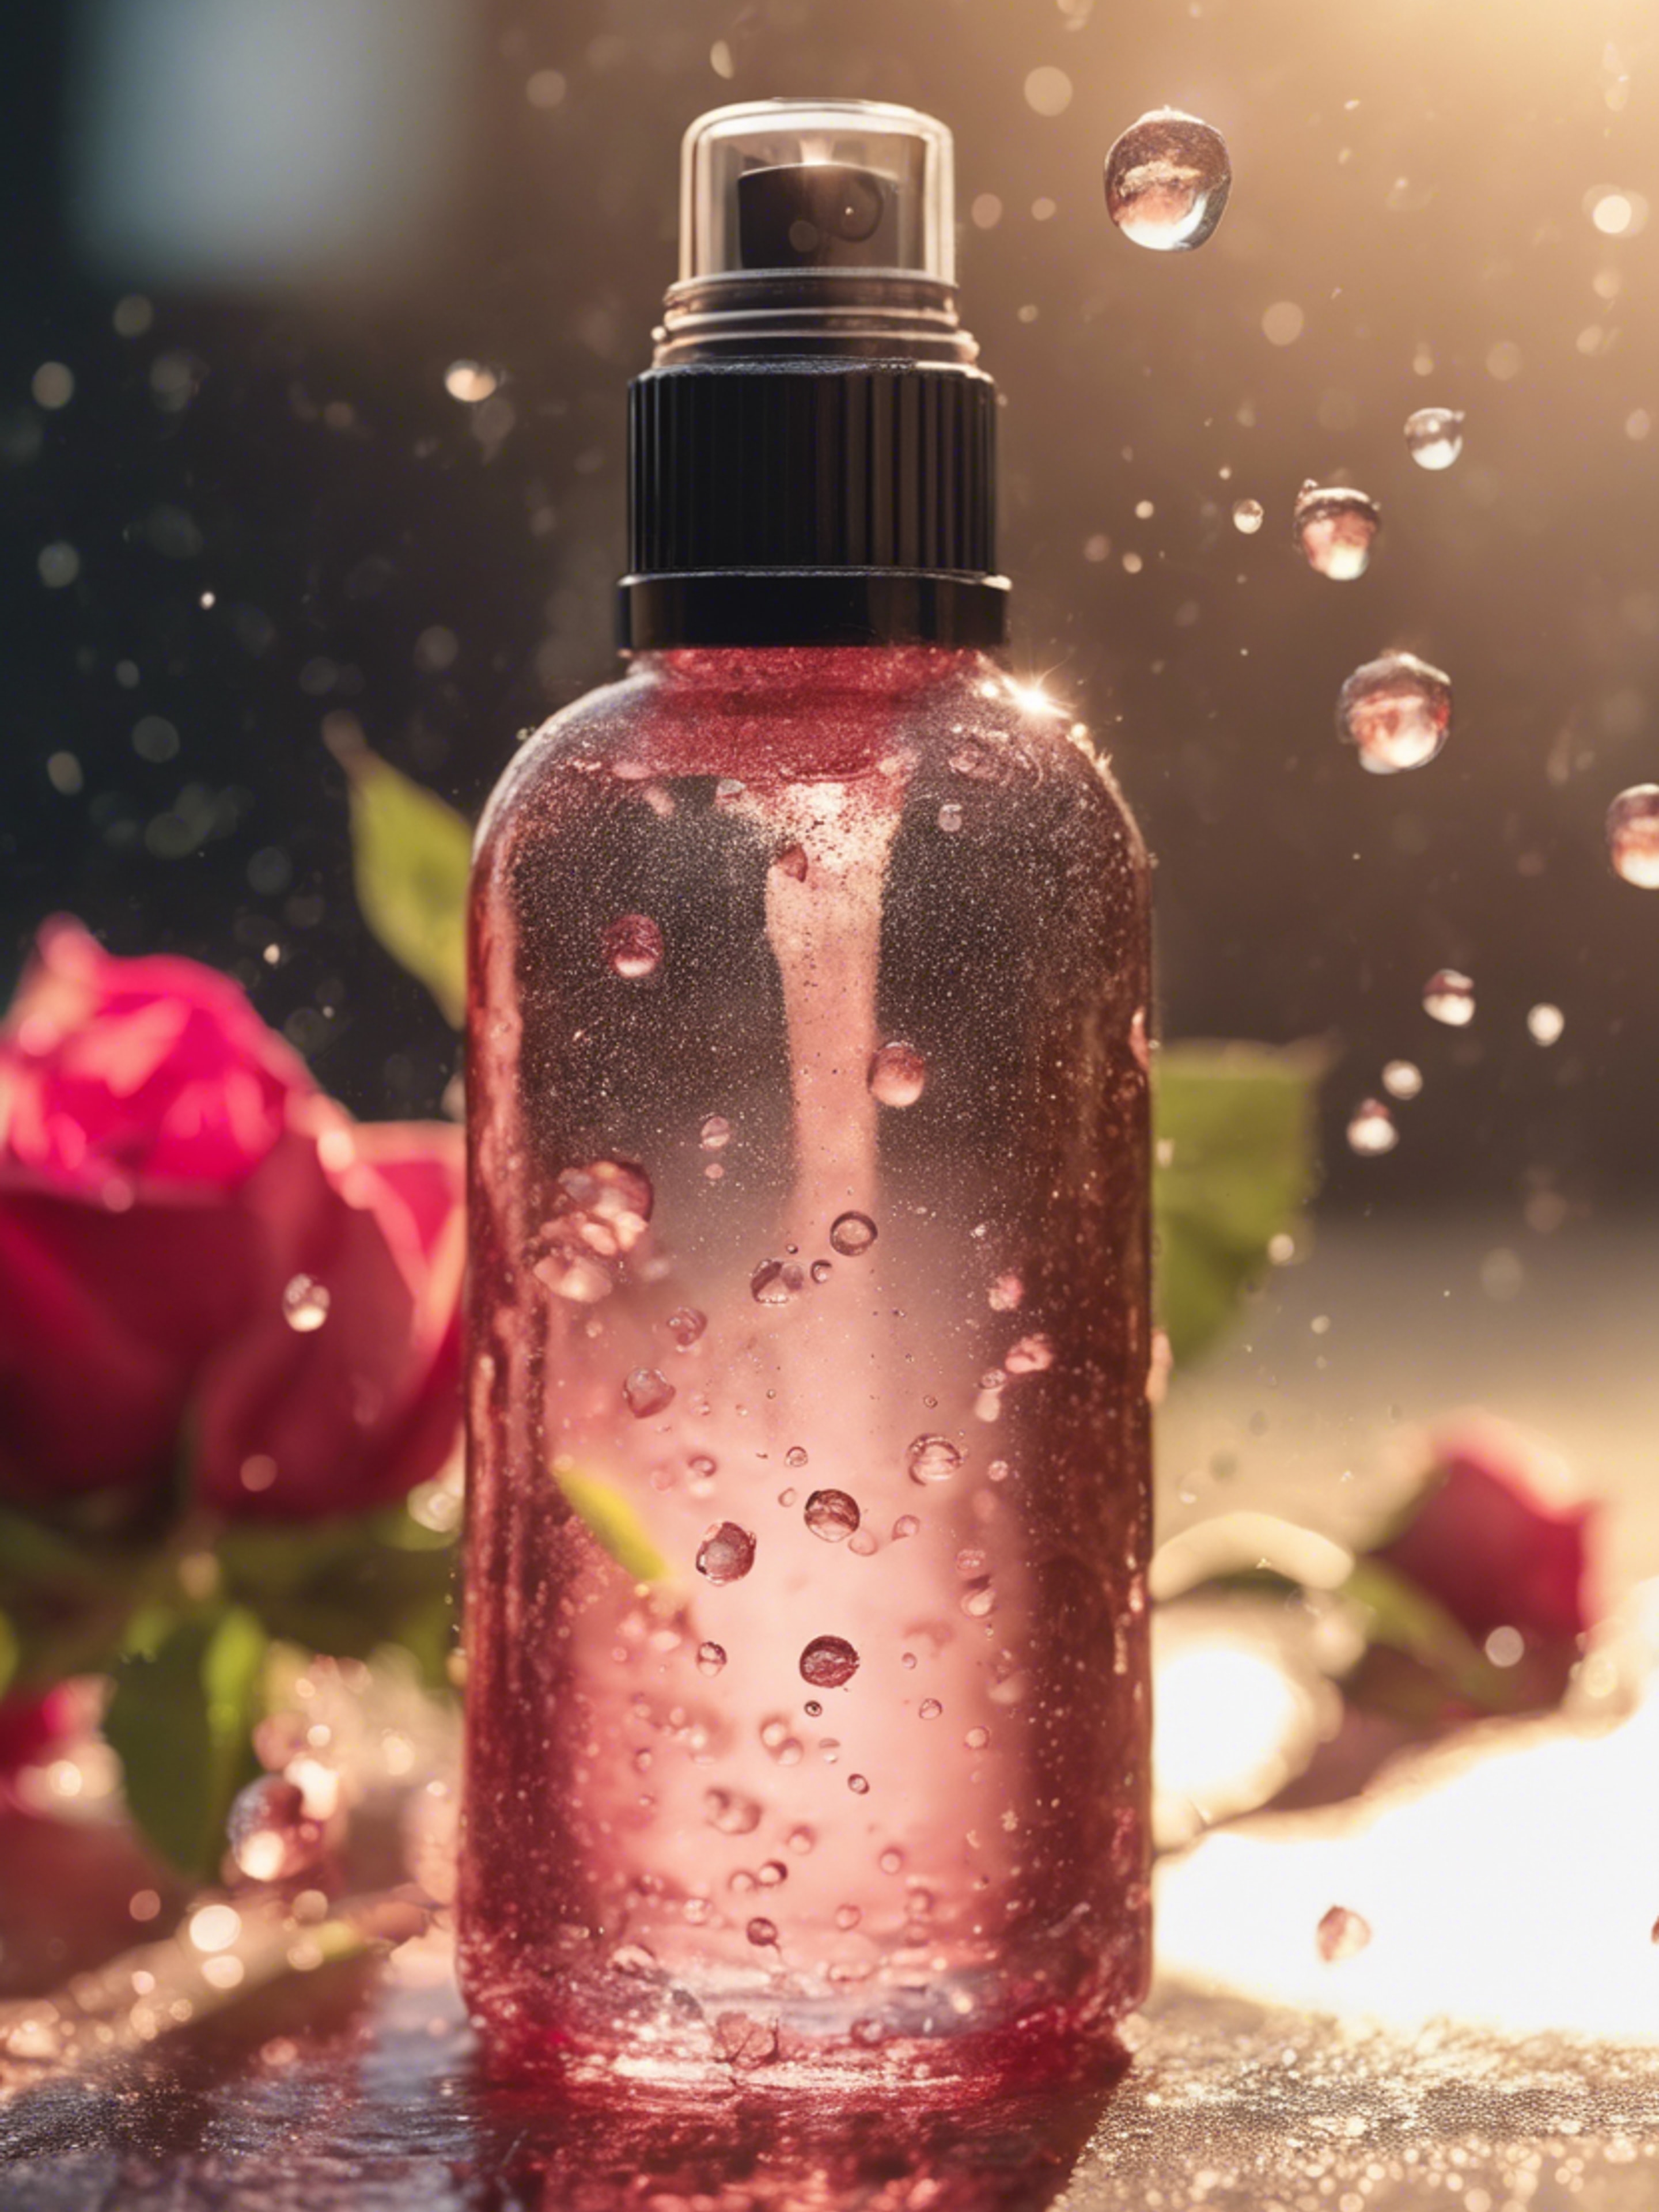 A refreshing spray bottle of rose water toner sprinkling droplets in the sunlight. Tapeta[f1b2cb92d7c7439692a8]